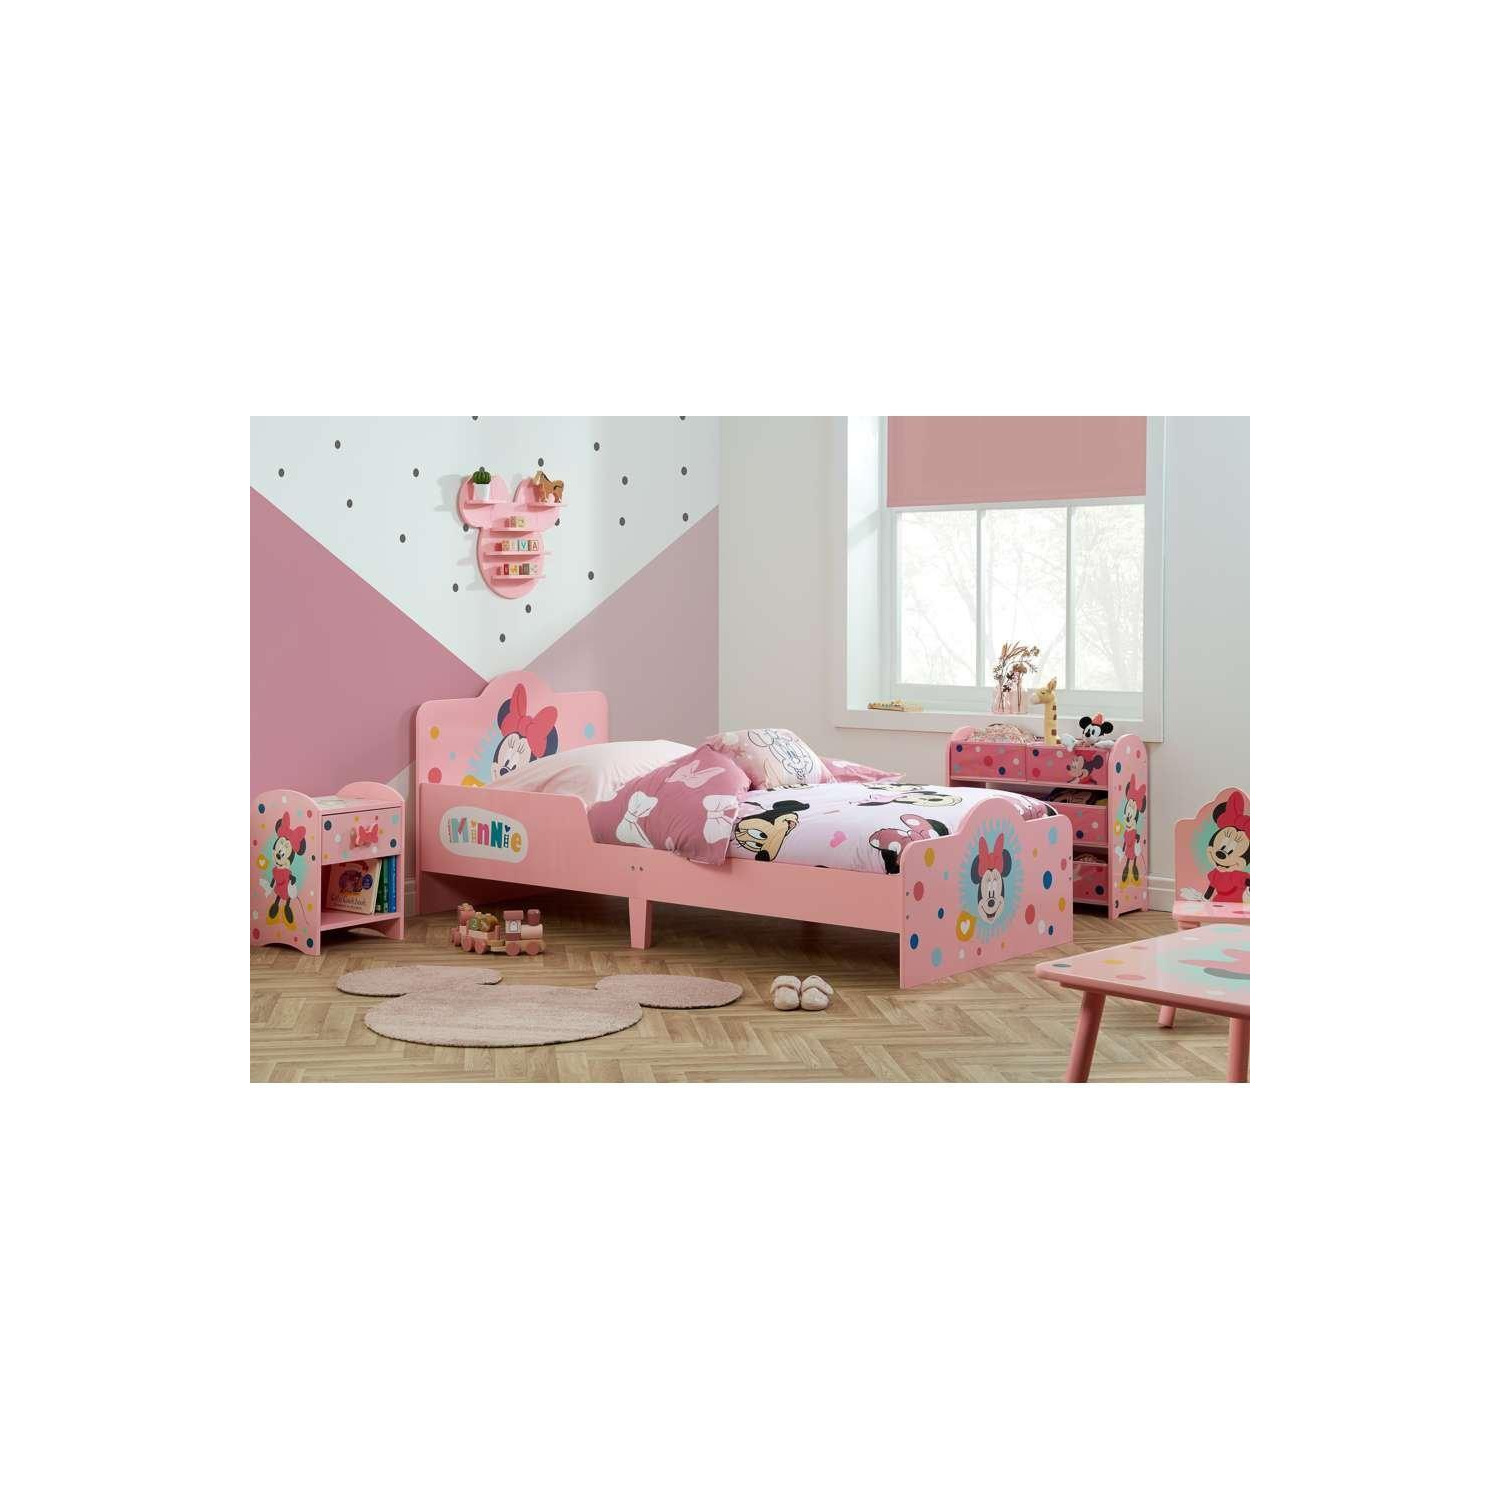 Official Disney Minnie Mouse Single Bed Childrens - image 1